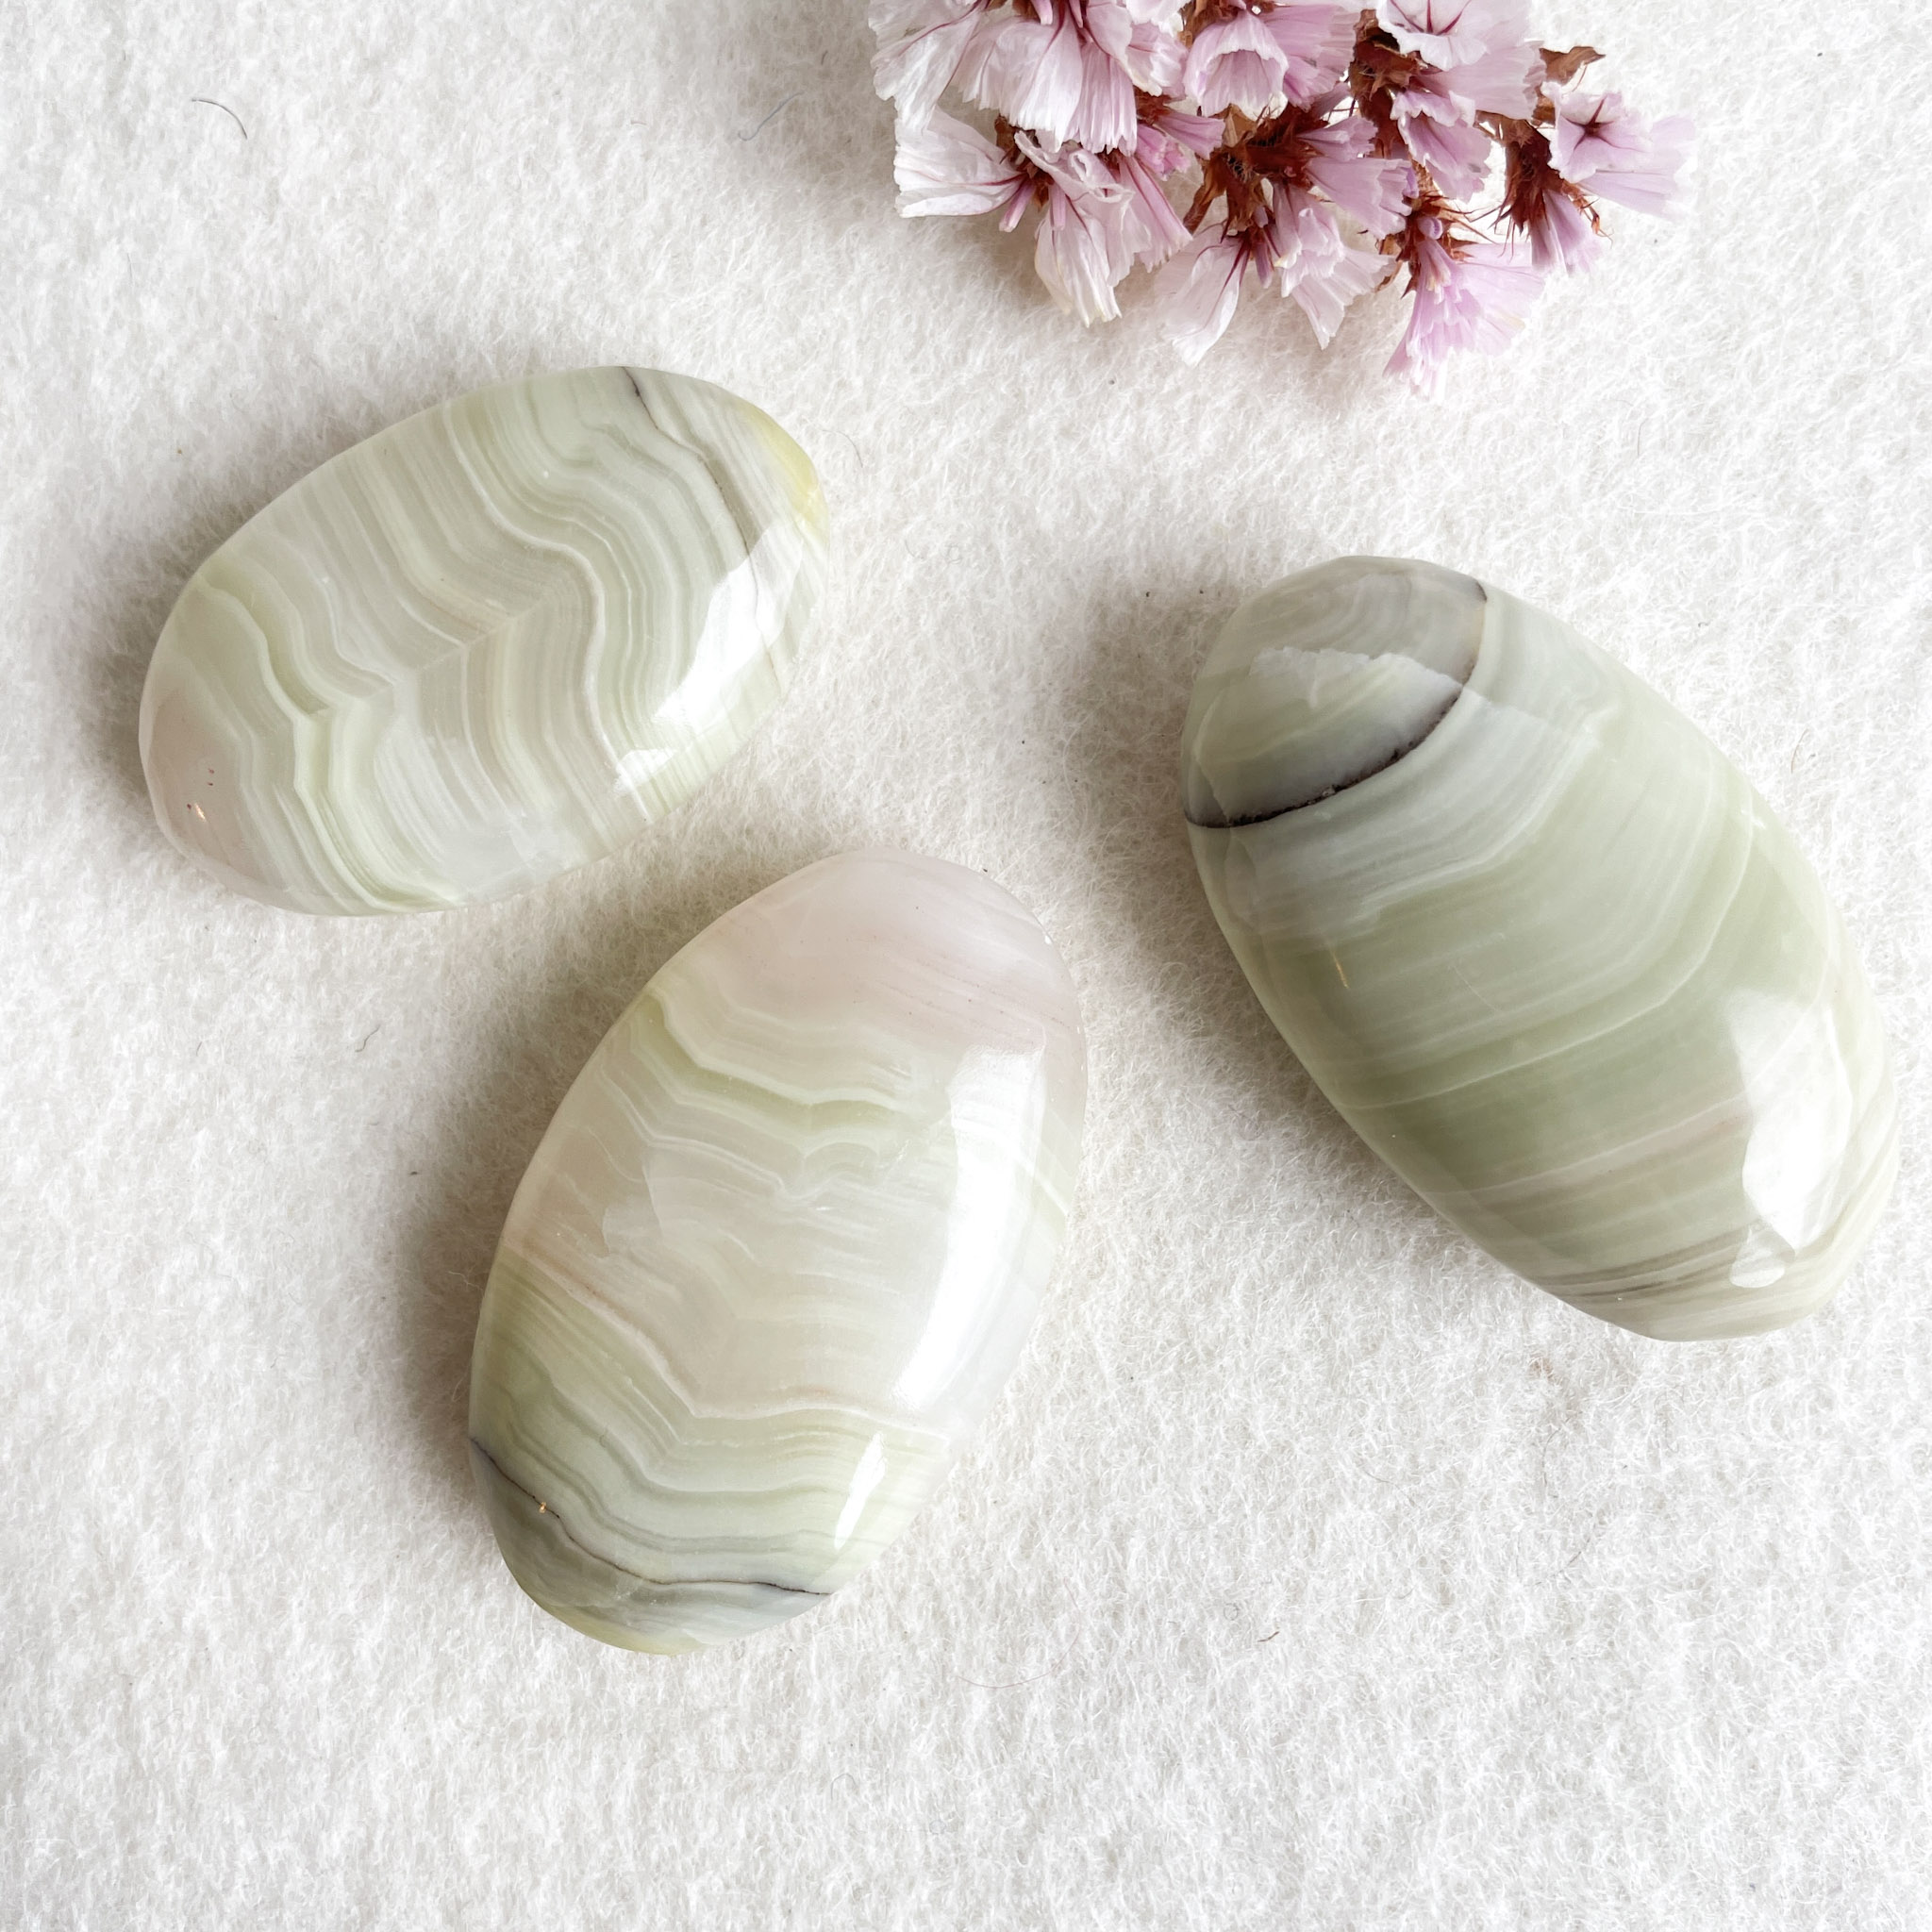 Three polished banded agate stones in shades of green and white on a white textured surface, with dried pink flowers in the background.